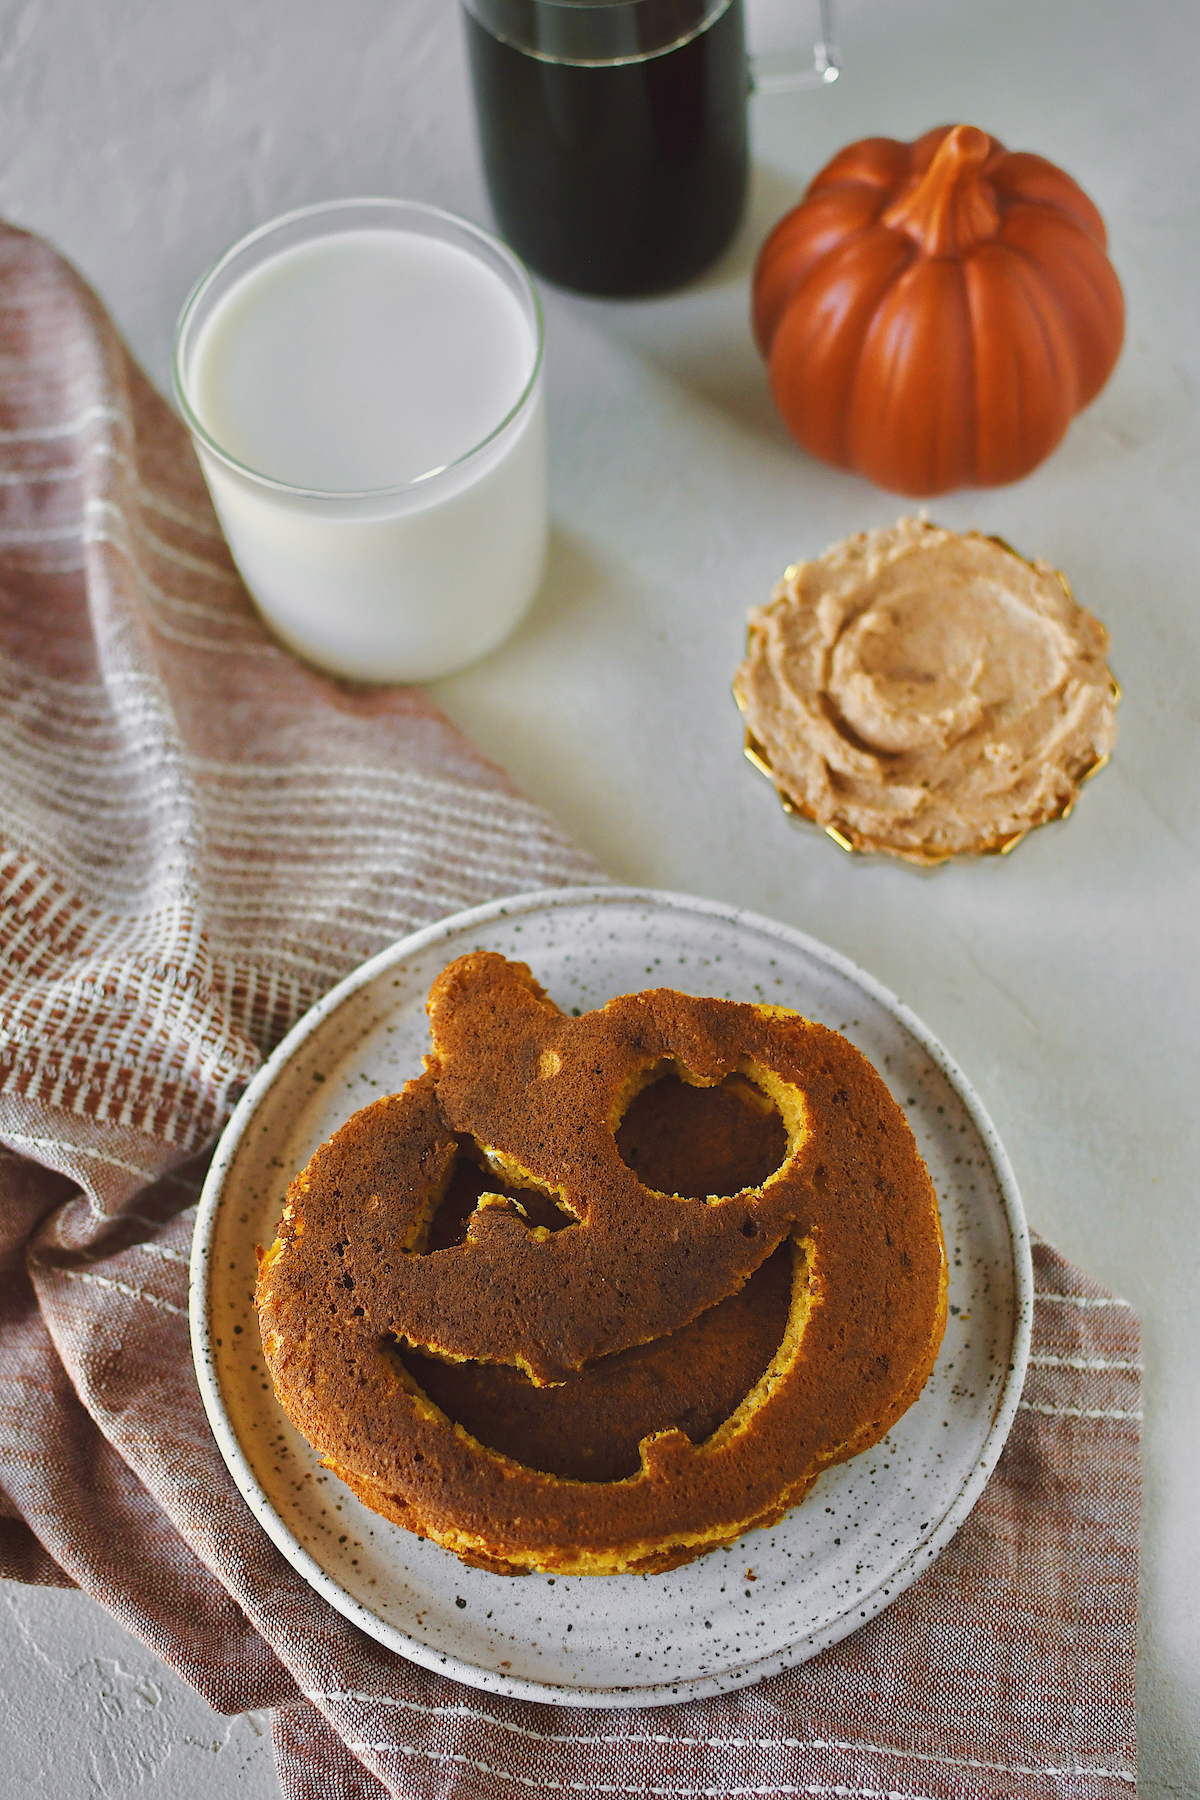 Jack-O-Lantern Pancakes on a plate, with a glass of milk on the side as well as some cinnamon butter and maple syrup.